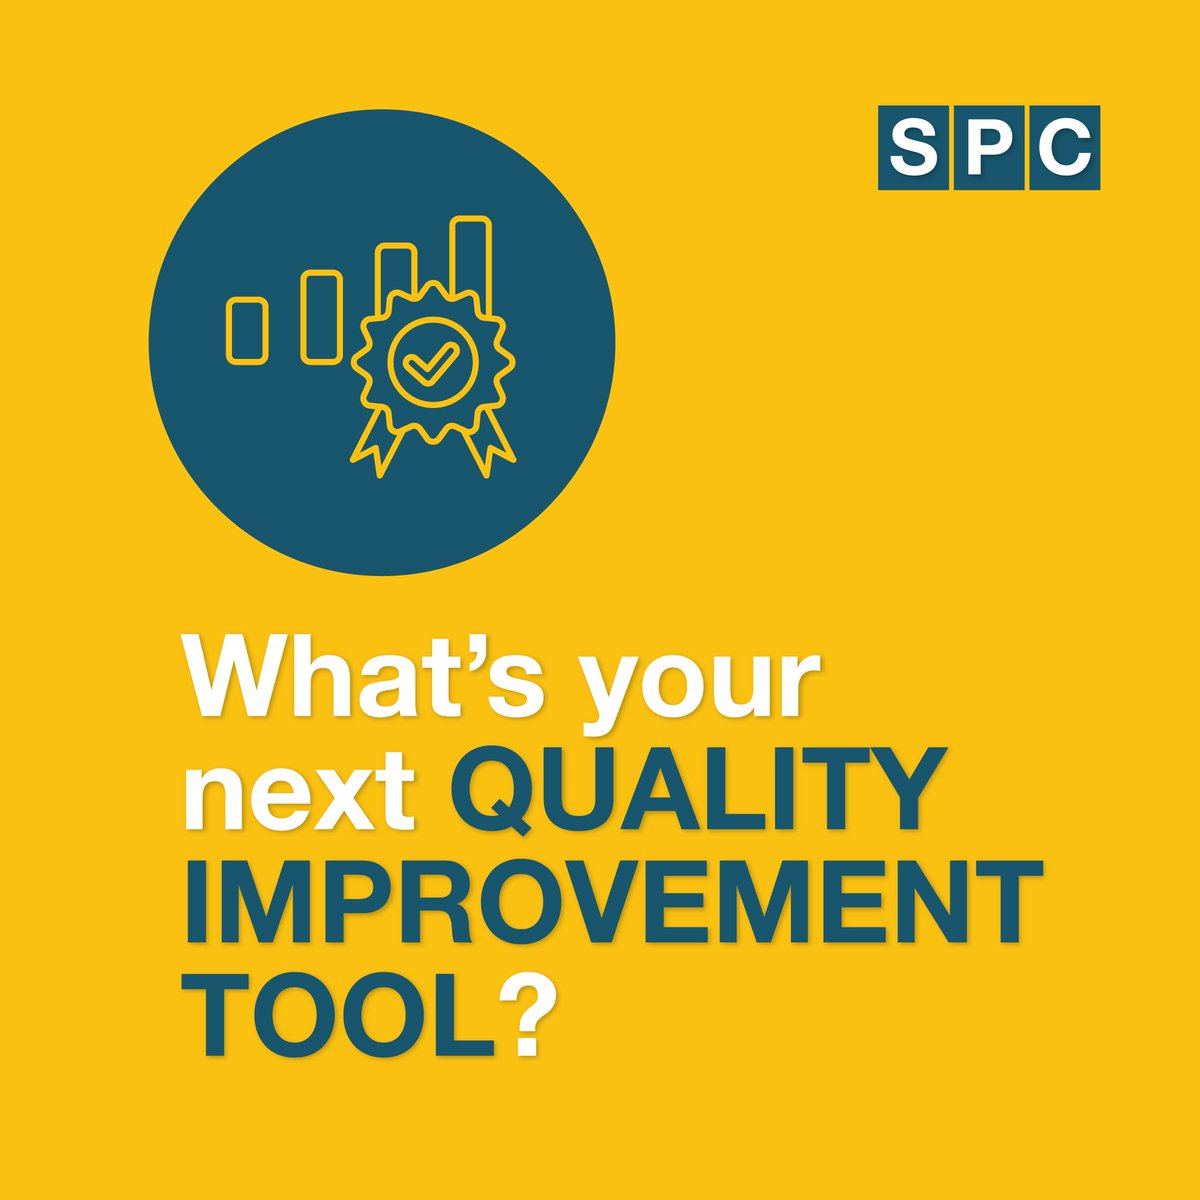 Do you have a strategic plan surrounding quality improvement? If you’re looking for an effective, easy-to-learn tool, look no further. Consider Smart Performance Charts: qimacros.com/trial/30-day
#qualityimprovement #QI #healthcare #quality